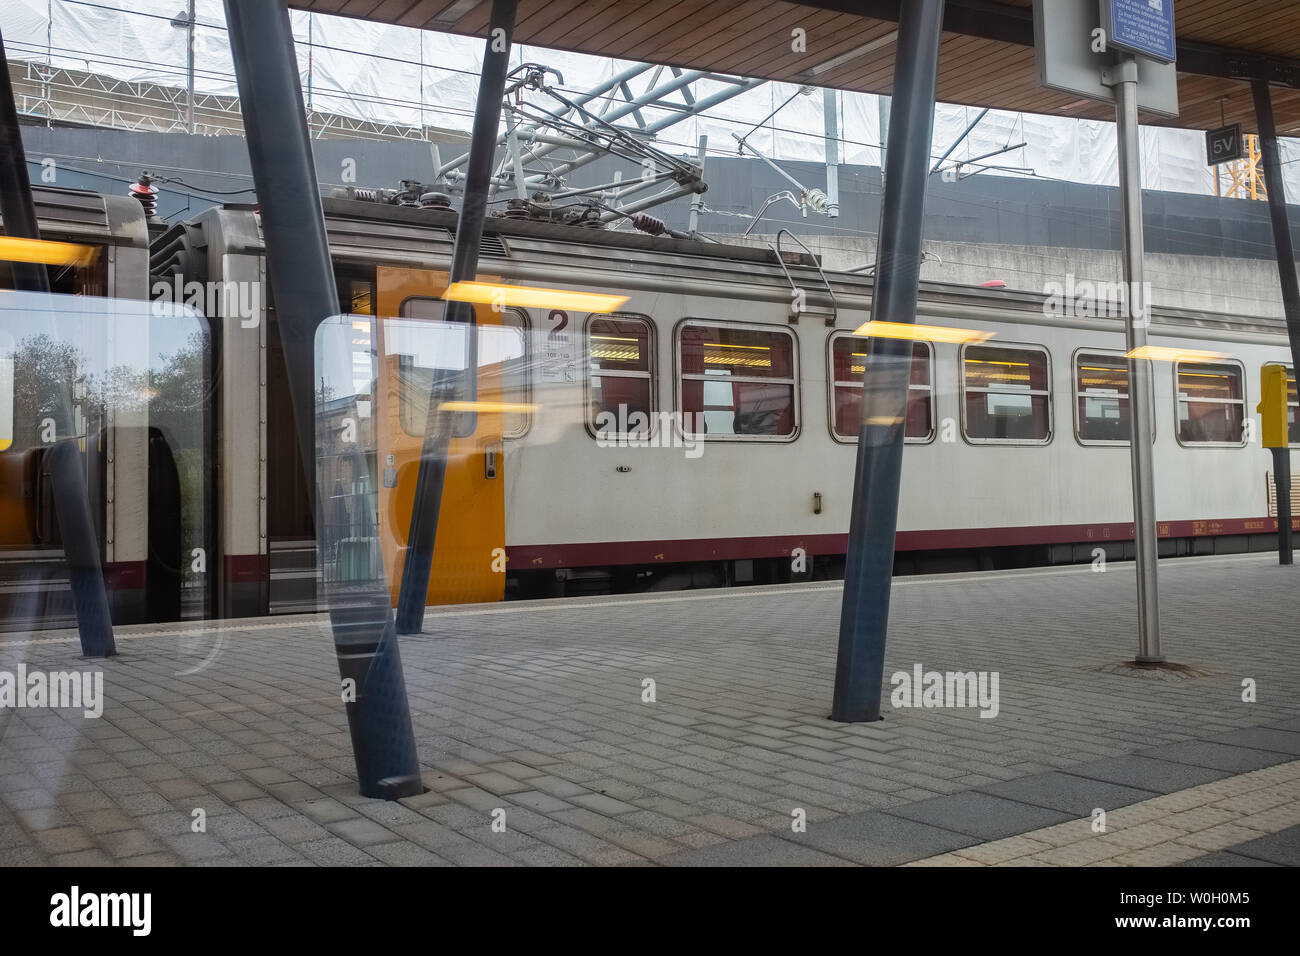 LUXEMBOURG CITY, LUXEMBOURG - OCTOBER 18, 2018: Central train station. Train stopped at the platform Stock Photo